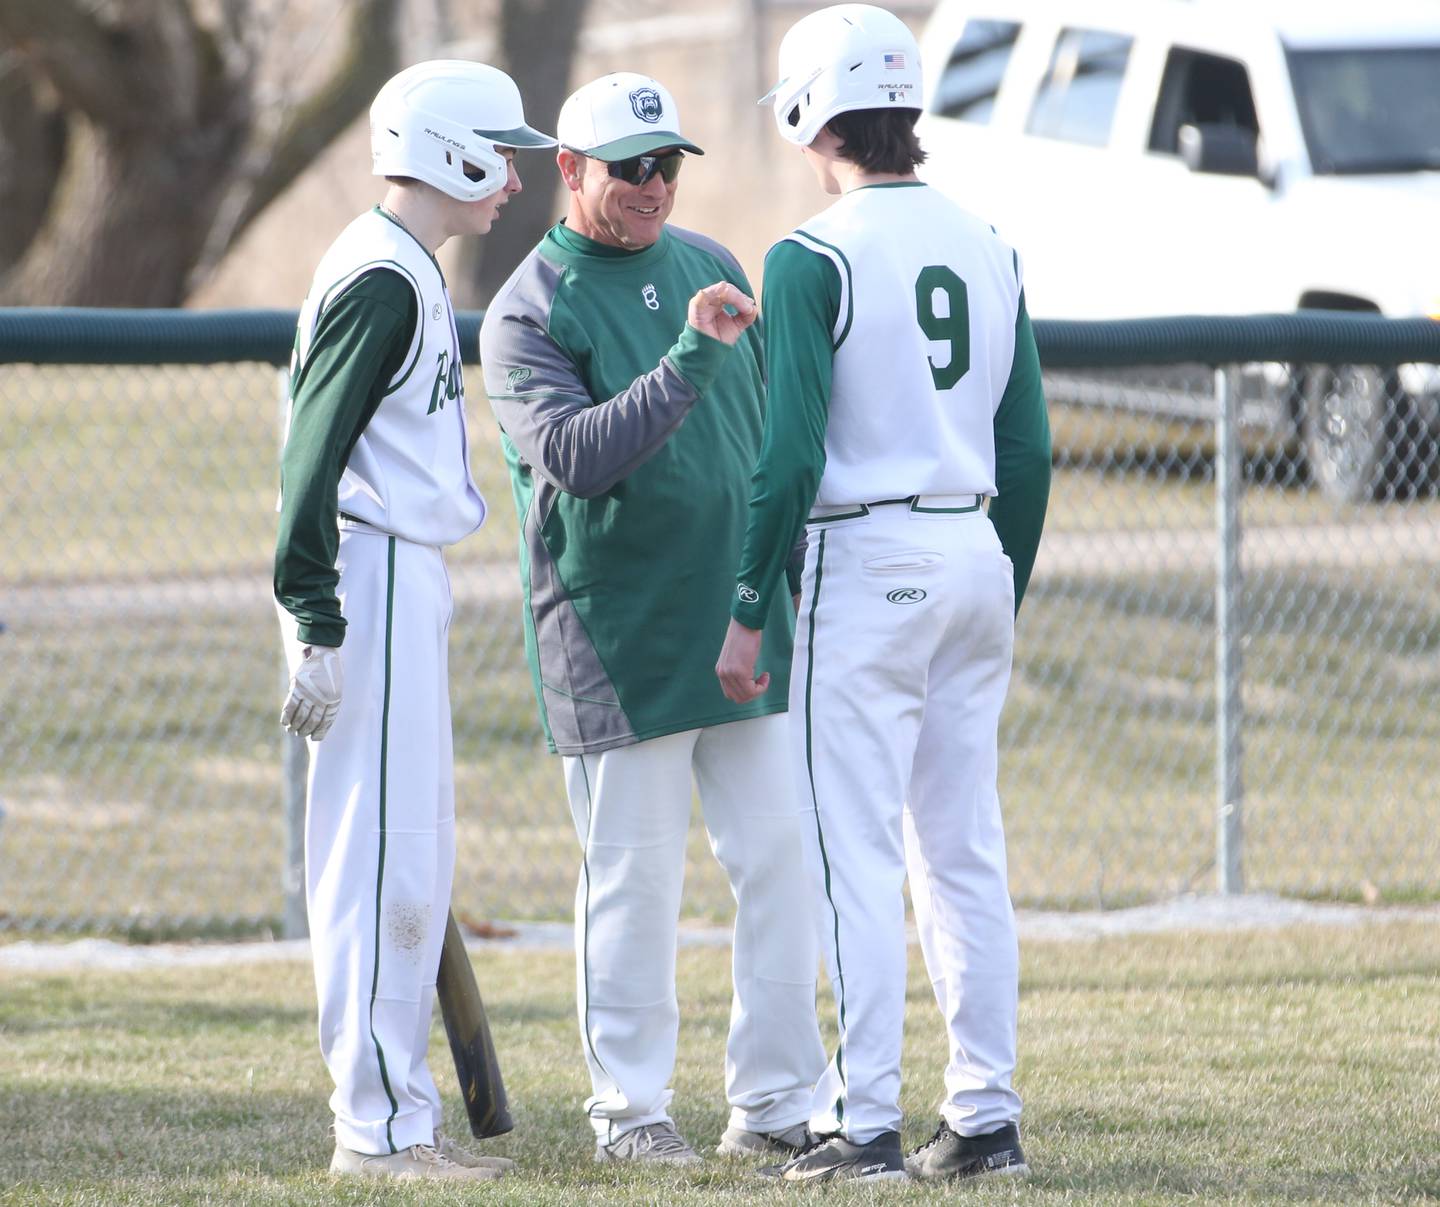 St. Bede head boys baseball coach Bill Booker (center) coaches players Alex Ankiewicz and Ryan Slingsby against Riverdale on Monday, March 20, 2023 at St. Bede Academy.